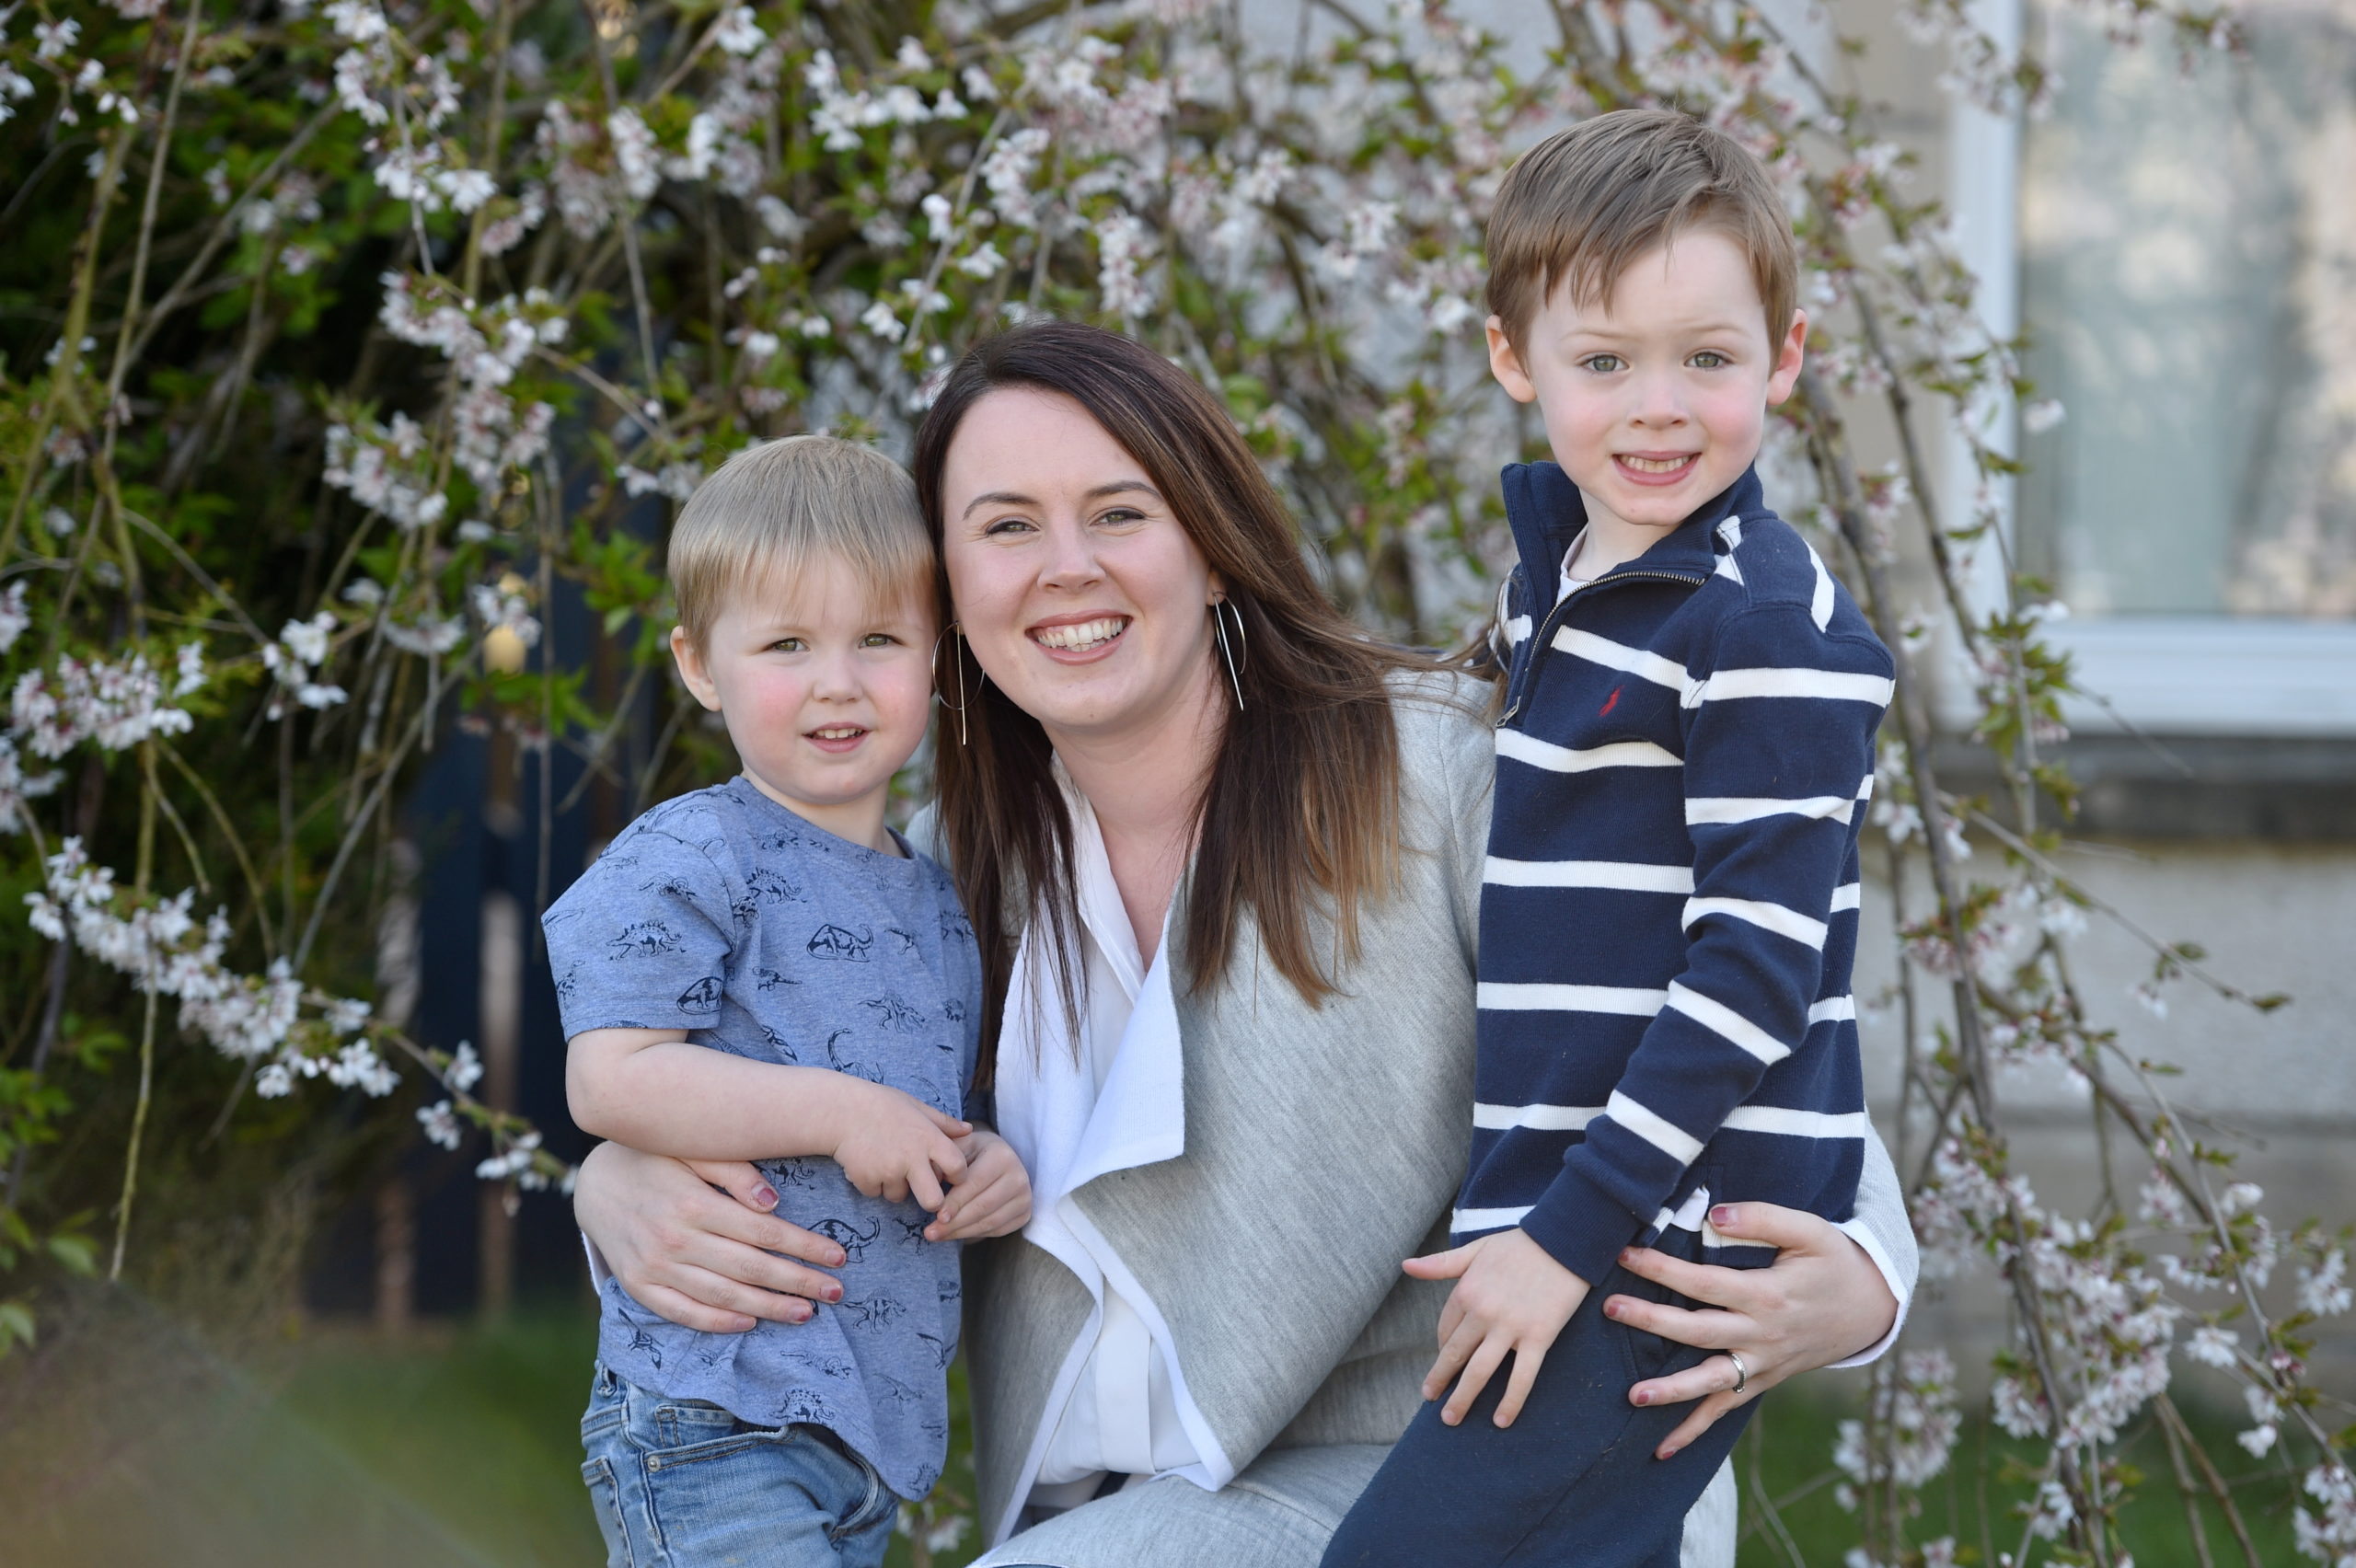 Mintlaw Academy teacher Nicola Robertson with her sons Oliver, 3, left, and Logan, 5, right. 
Picture by DARRELL BENNS